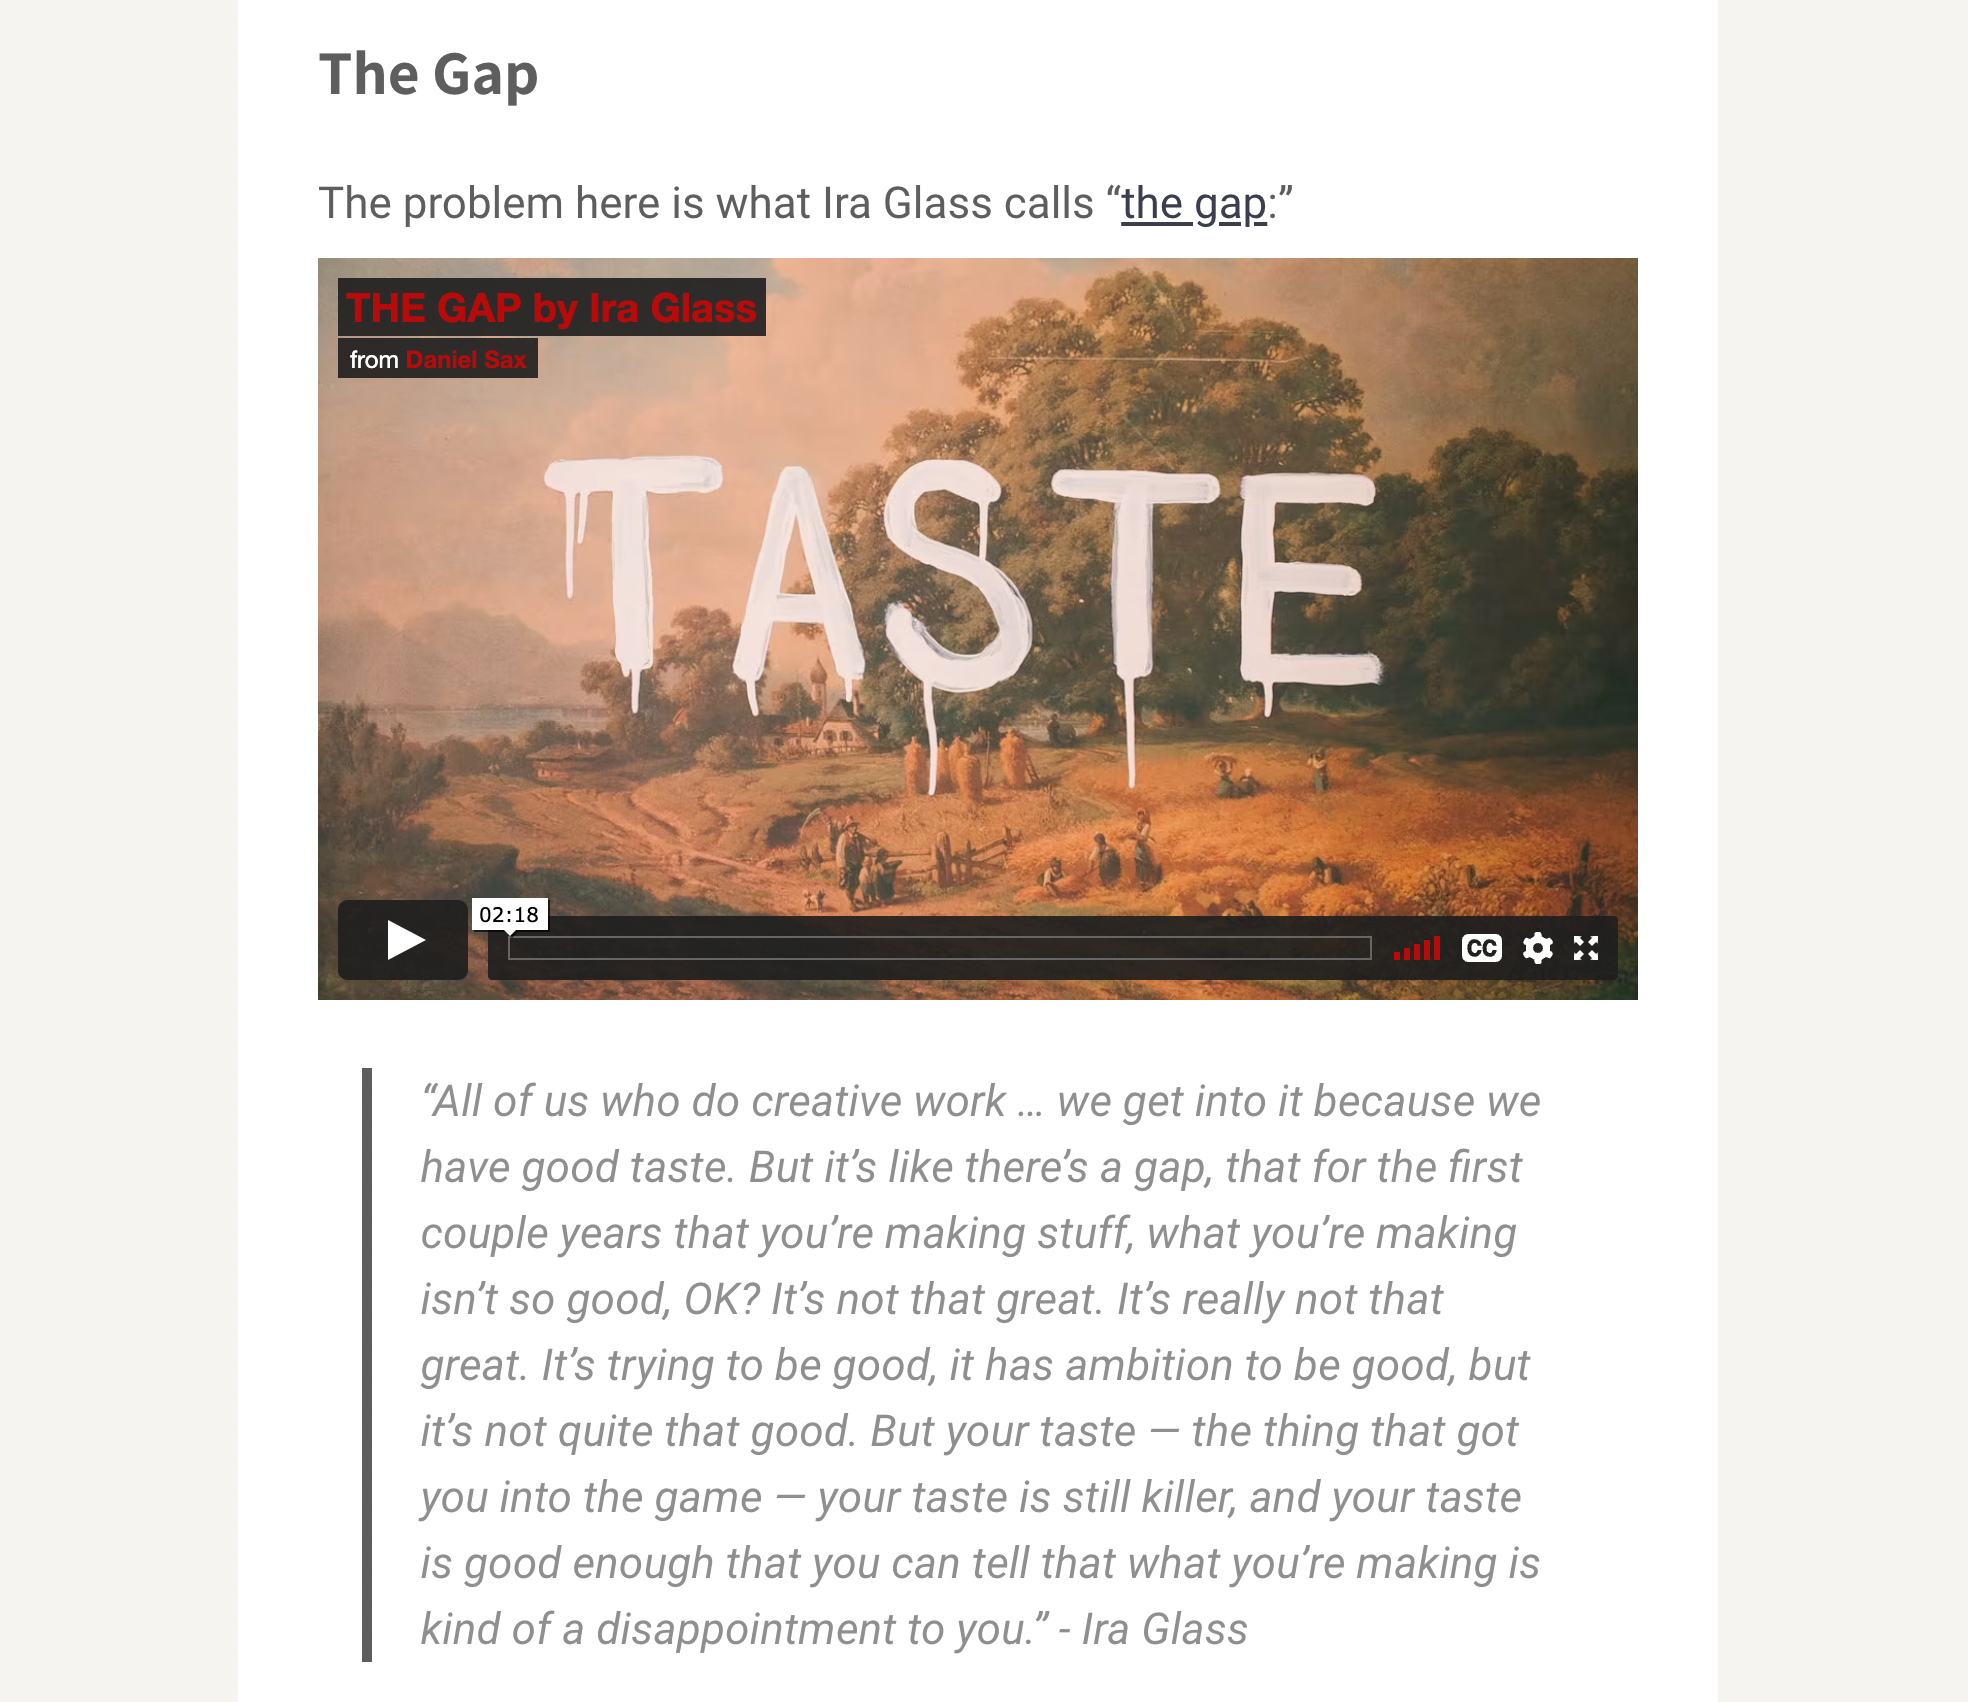 Example of an embedded video breaking up a blog post